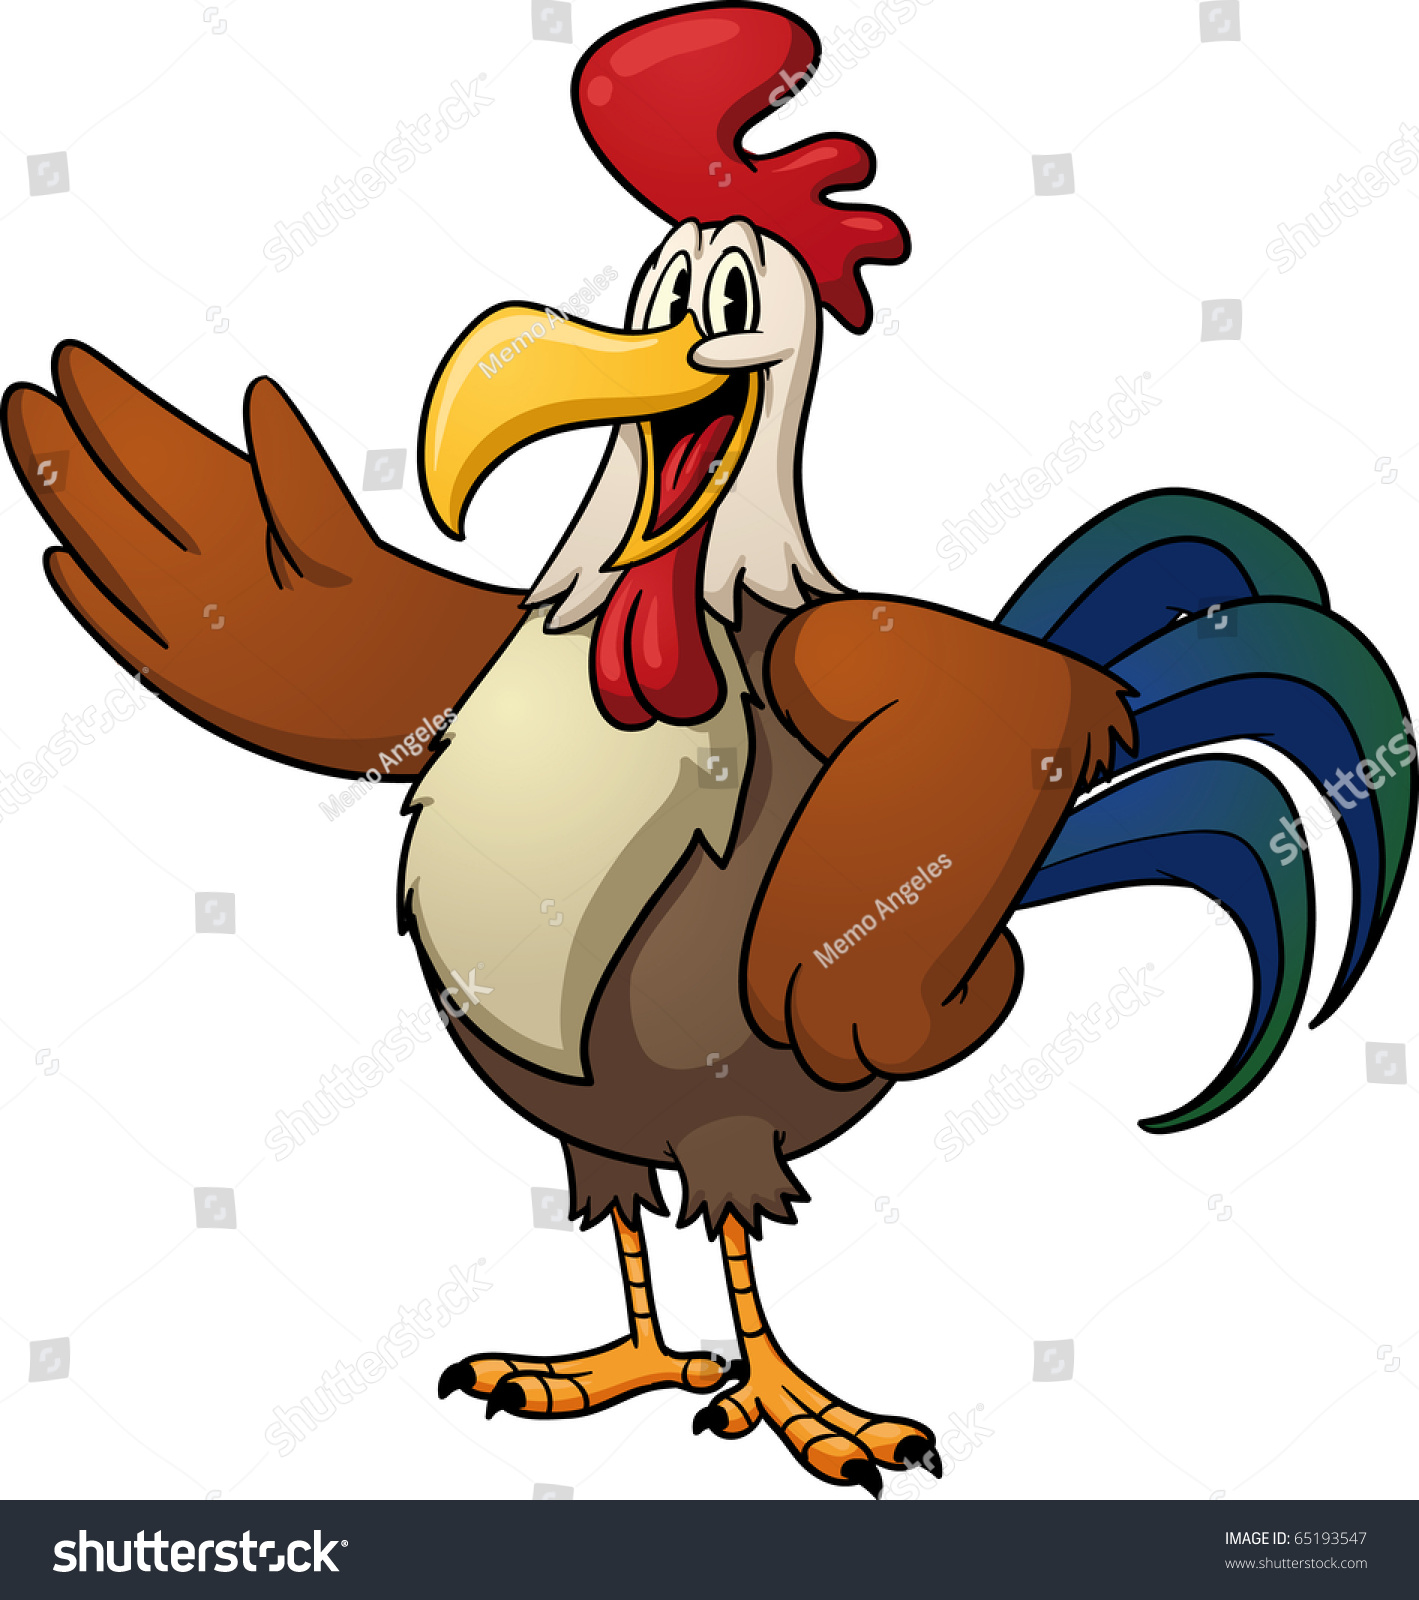 rooster animation clipart - photo #38